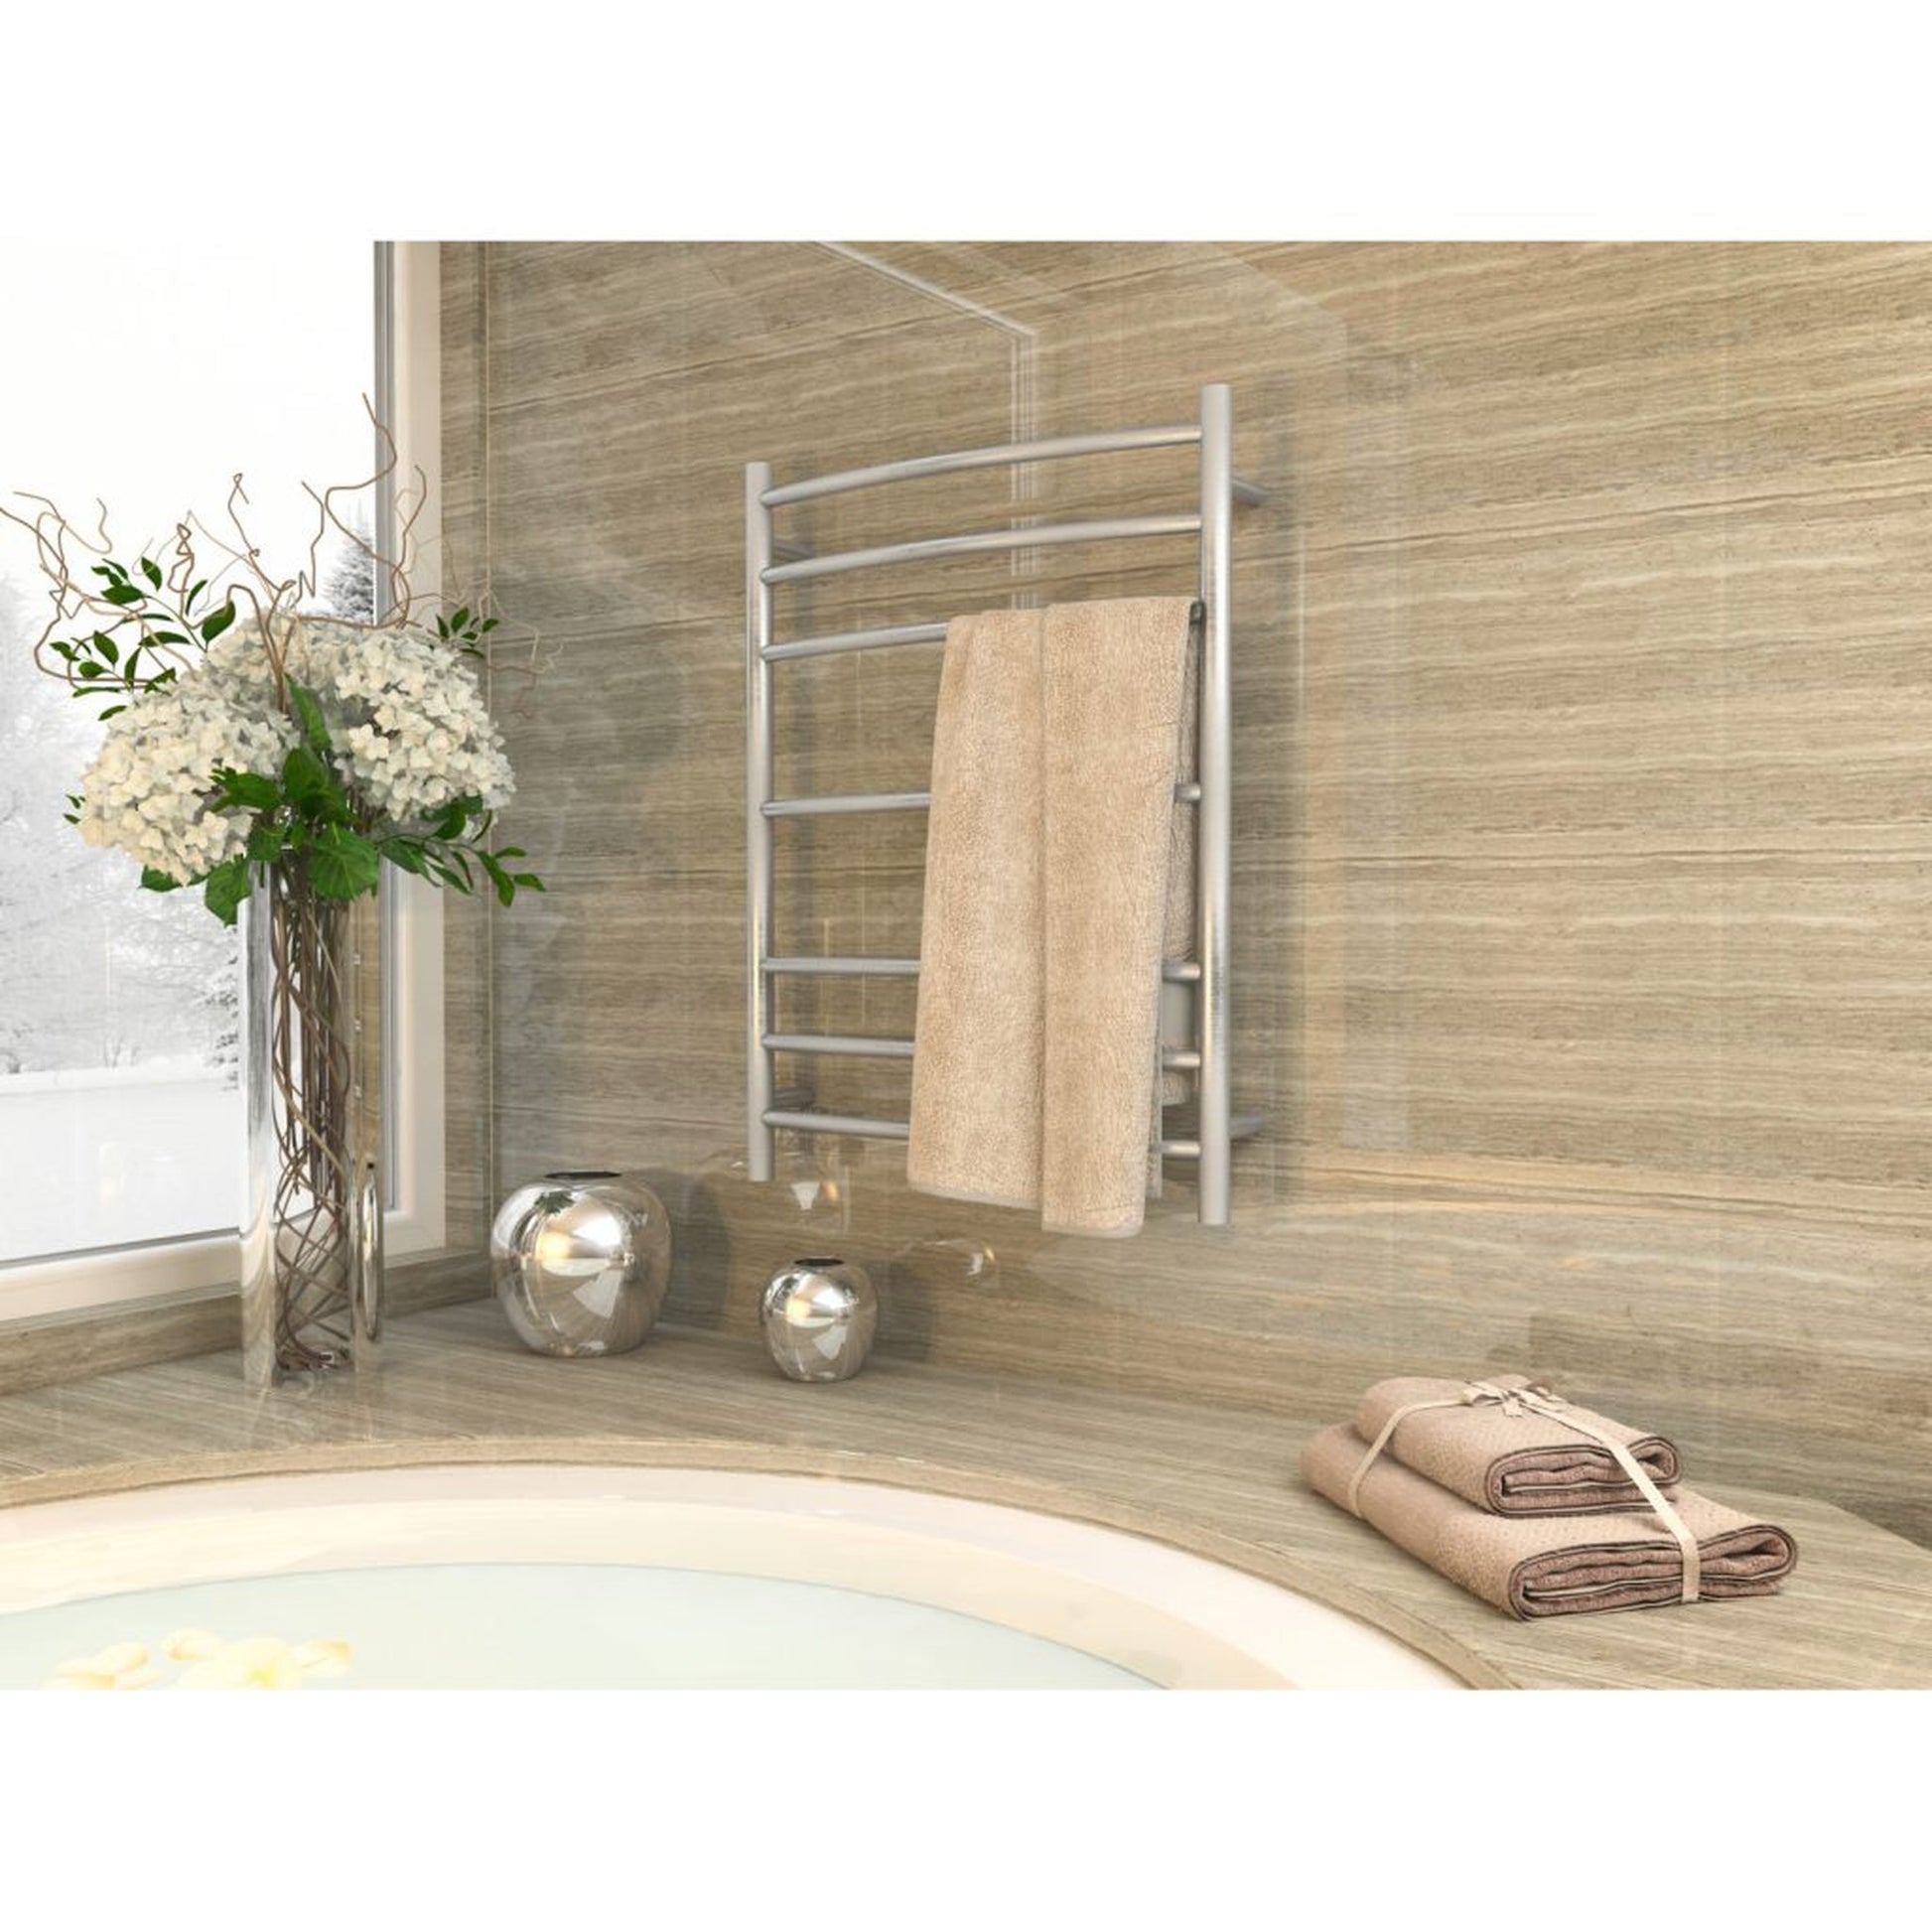 ANZZI Gown Series 7-Bar Stainless Steel Brushed Nickel Wall-Mounted Electric Towel Warmer Rack